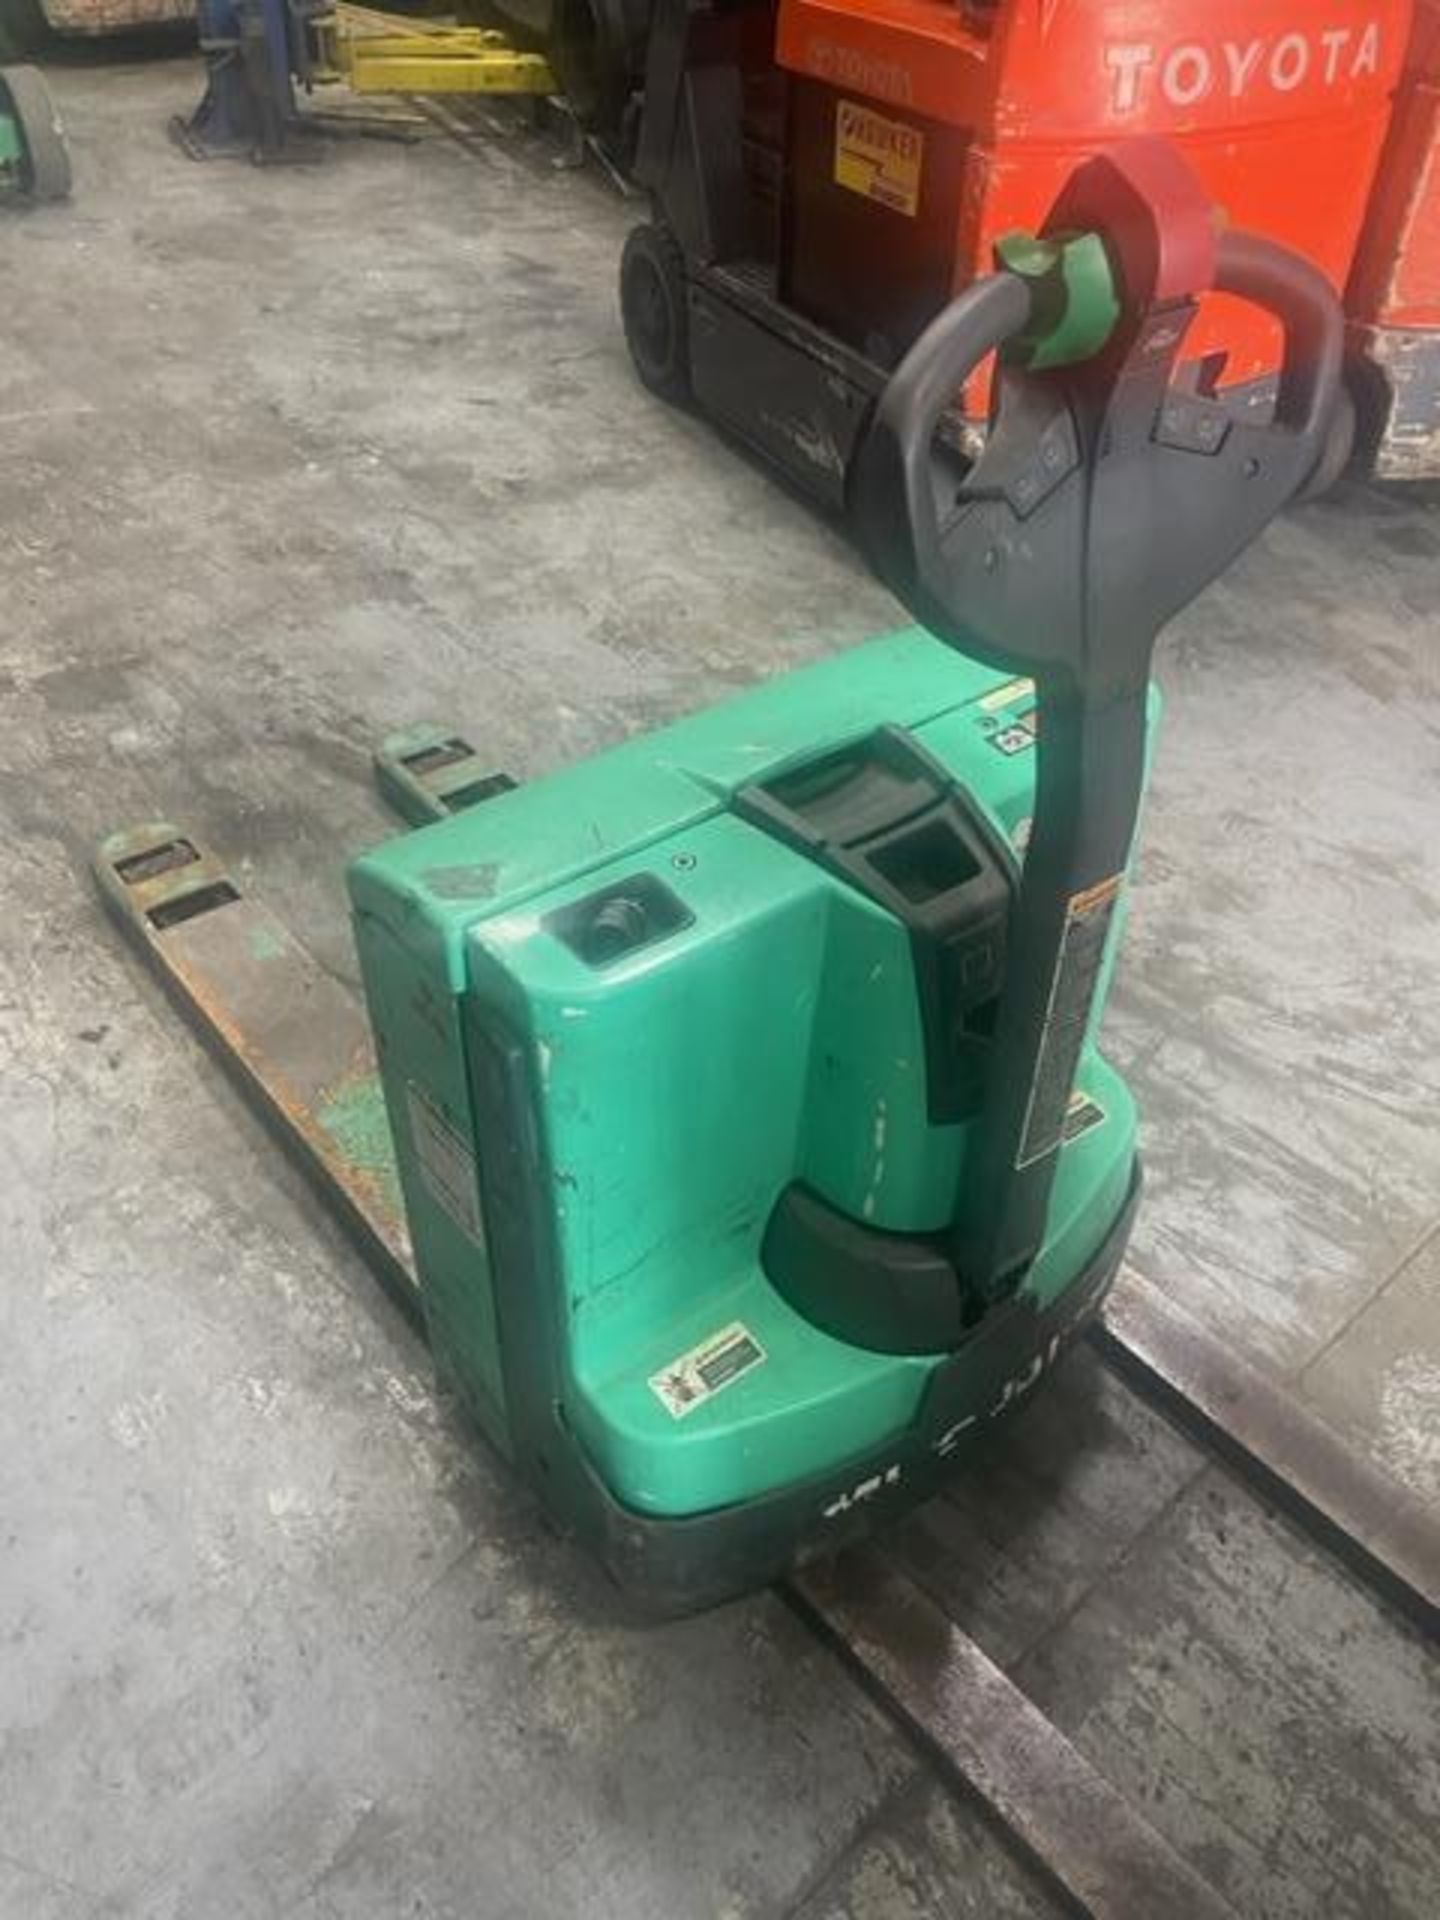 MITSUBISHI PALLET JACK MODEL PW23, ELECTRIC, APPROX 24V, APPROX MAX CAPACITY 4500, NEEDS NEW BATTERY - Image 2 of 3